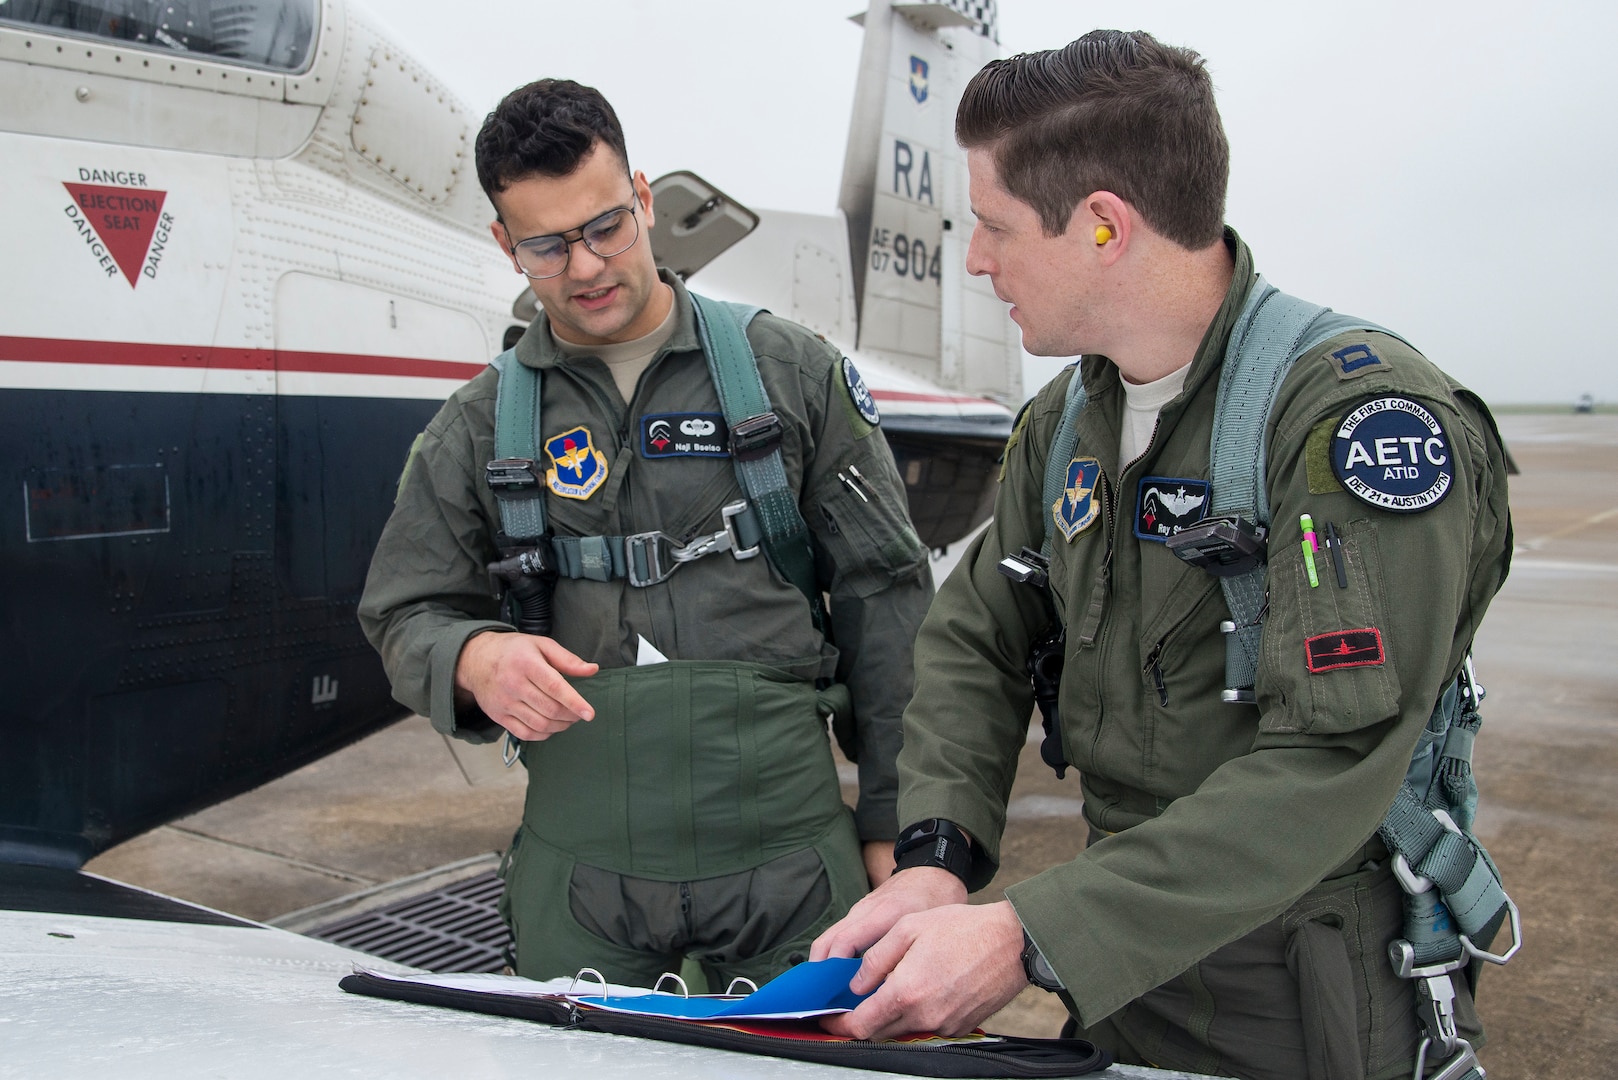 Capt. Ray Stone (right), Pilot Training Next instructor pilot, and 2nd Lt. Naji Bseiso, PTN student, go over flying procedures prior to a training mission at Austin-Bergstrom International Airport in Austin, Texas, Feb. 5, 2019. The current PTN class is comprised of 26 students, including 16 active duty officer students (six of whom are participating in a remotely-piloted aircraft only track), two Air National Guard officers, two U.S. Navy officers, one Royal Air Force officer, and five enlisted Airmen. (U.S. Air Force photo by Sean M. Worrell)